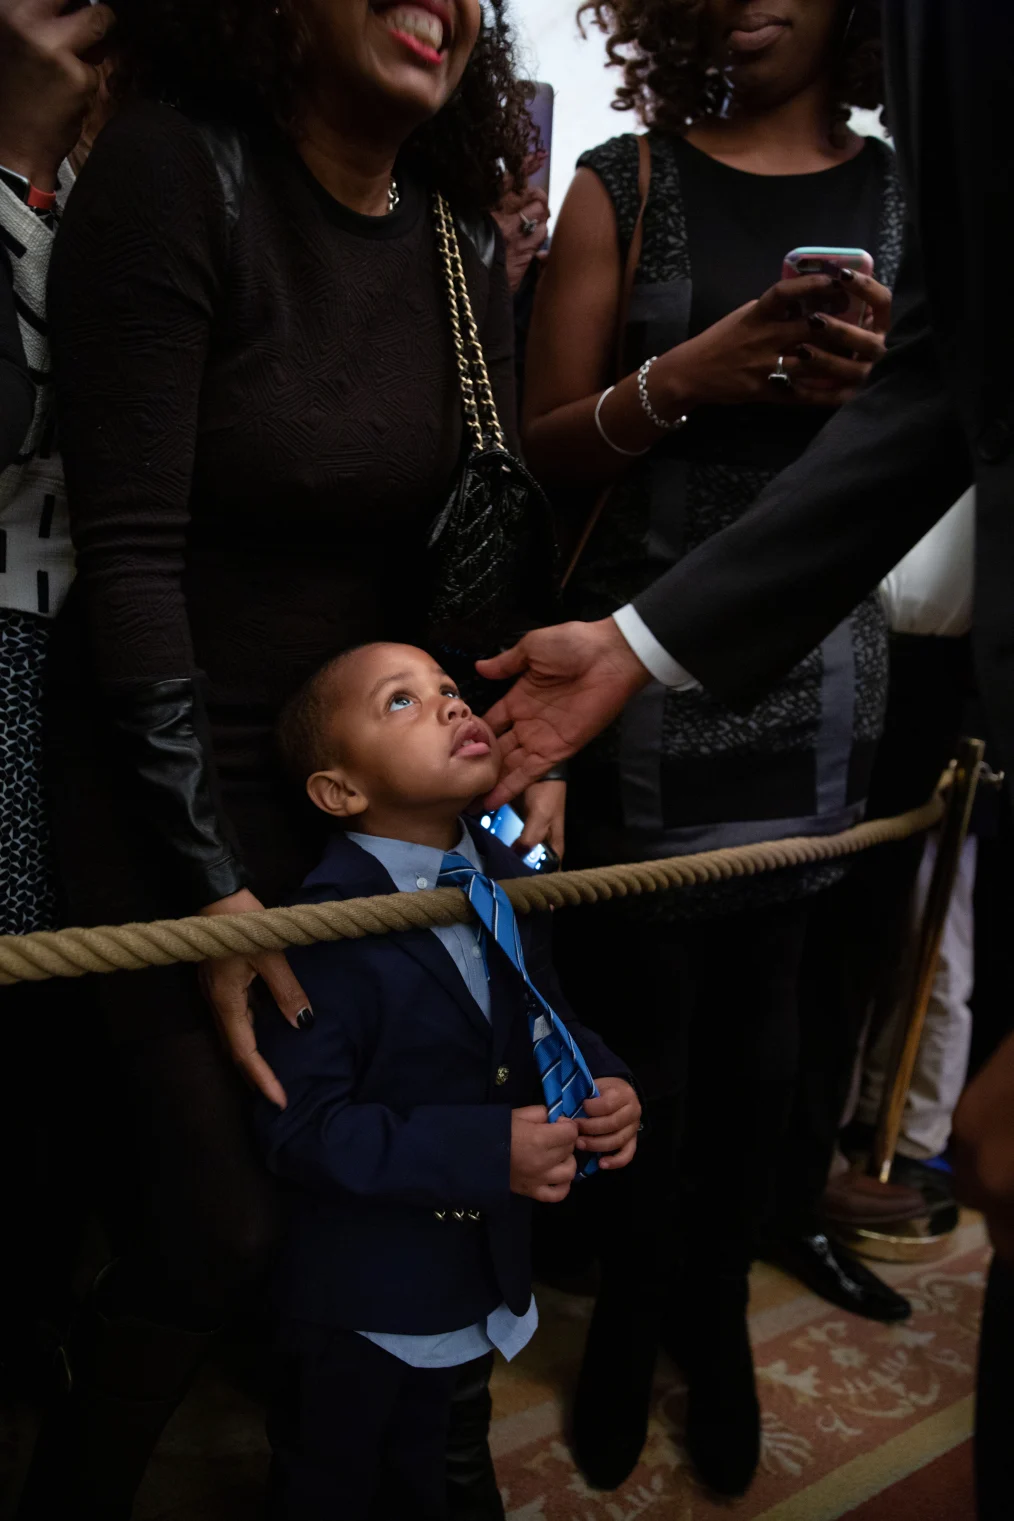 A young boy with a light skin tone looks up as President Obama holds his face. President Obama is out of frame. The boy is wearing a blue suit and tie. People gather behind and watch on. 